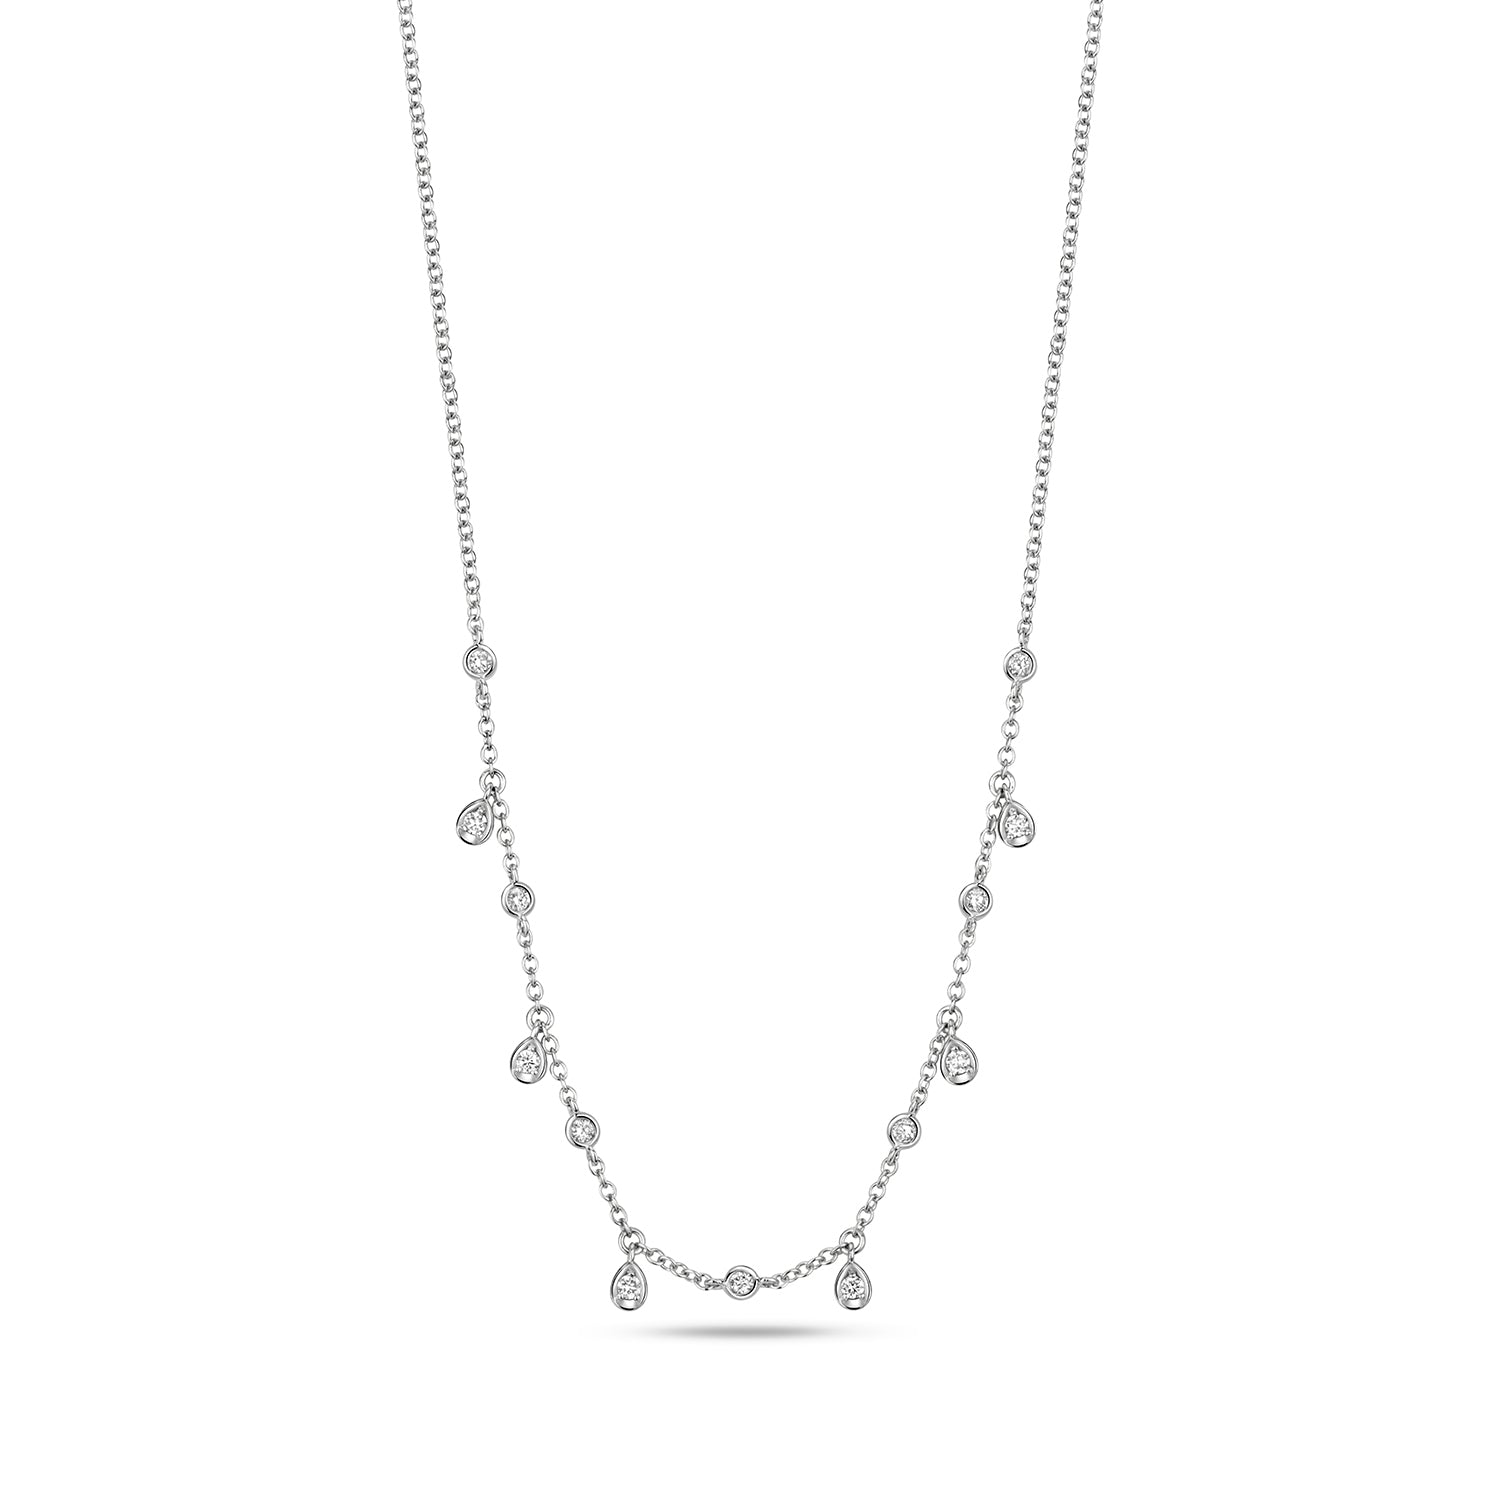 DIAMOND RUBOVER TEARDROPS NECKLACE IN 18CT WHITE GOLD